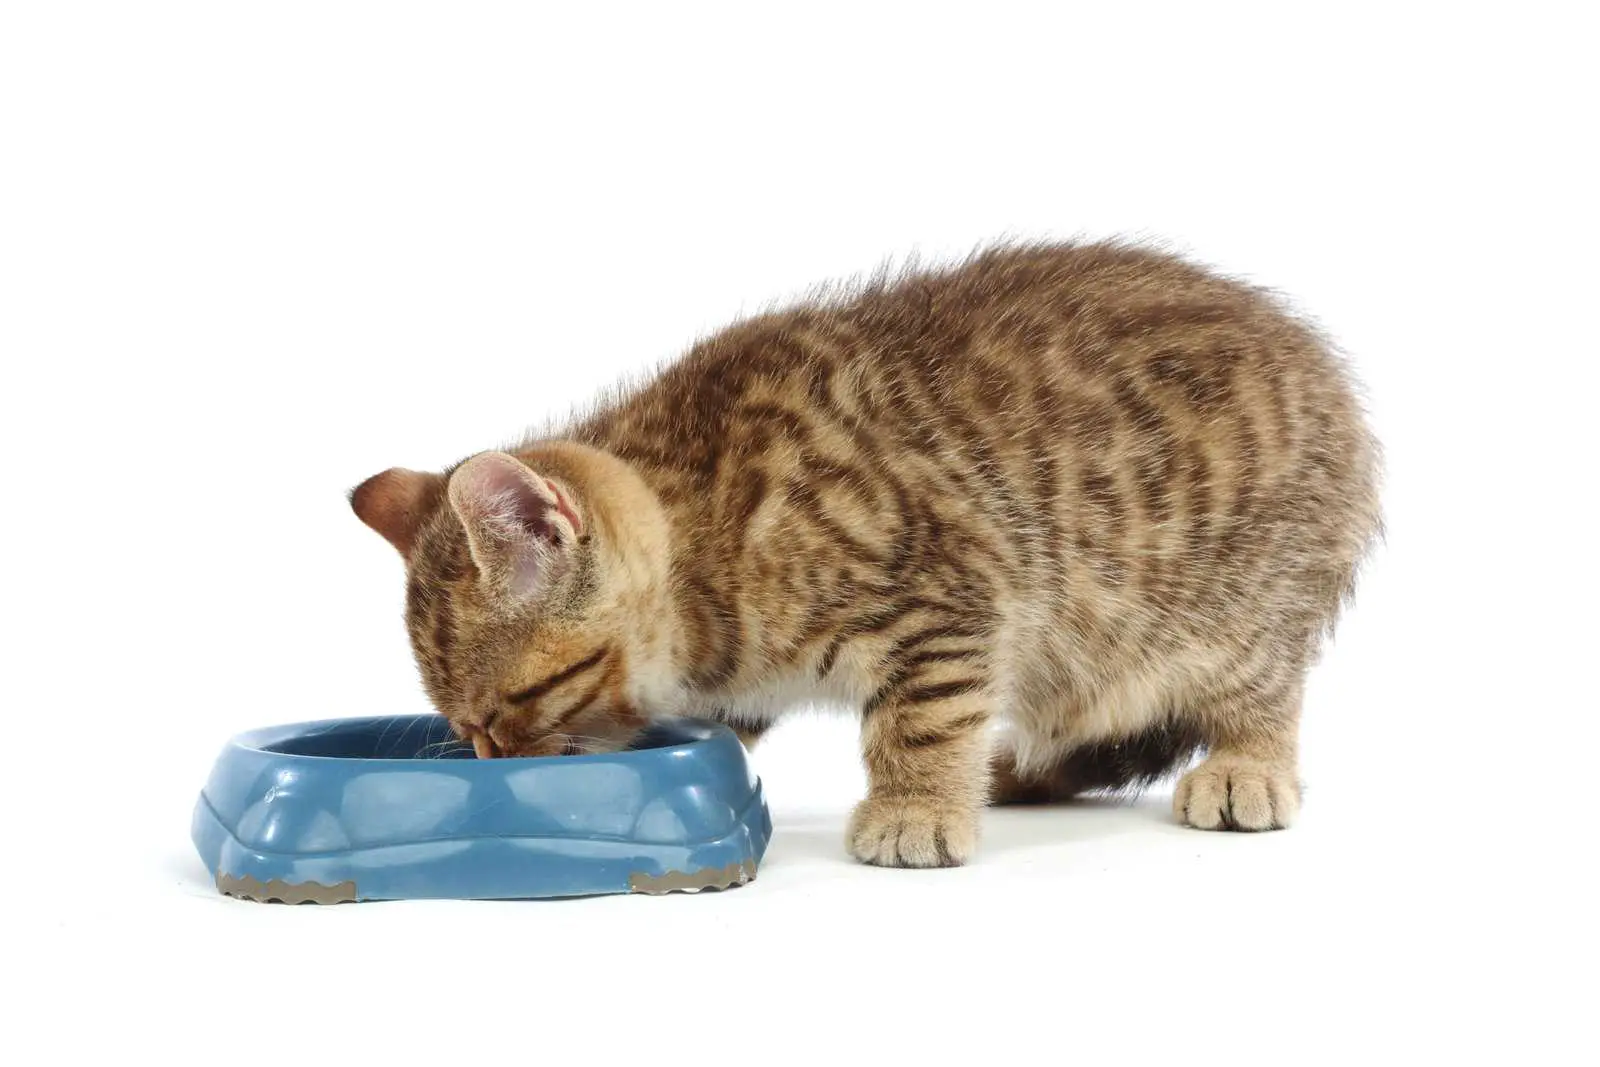 Do cats chew their food?